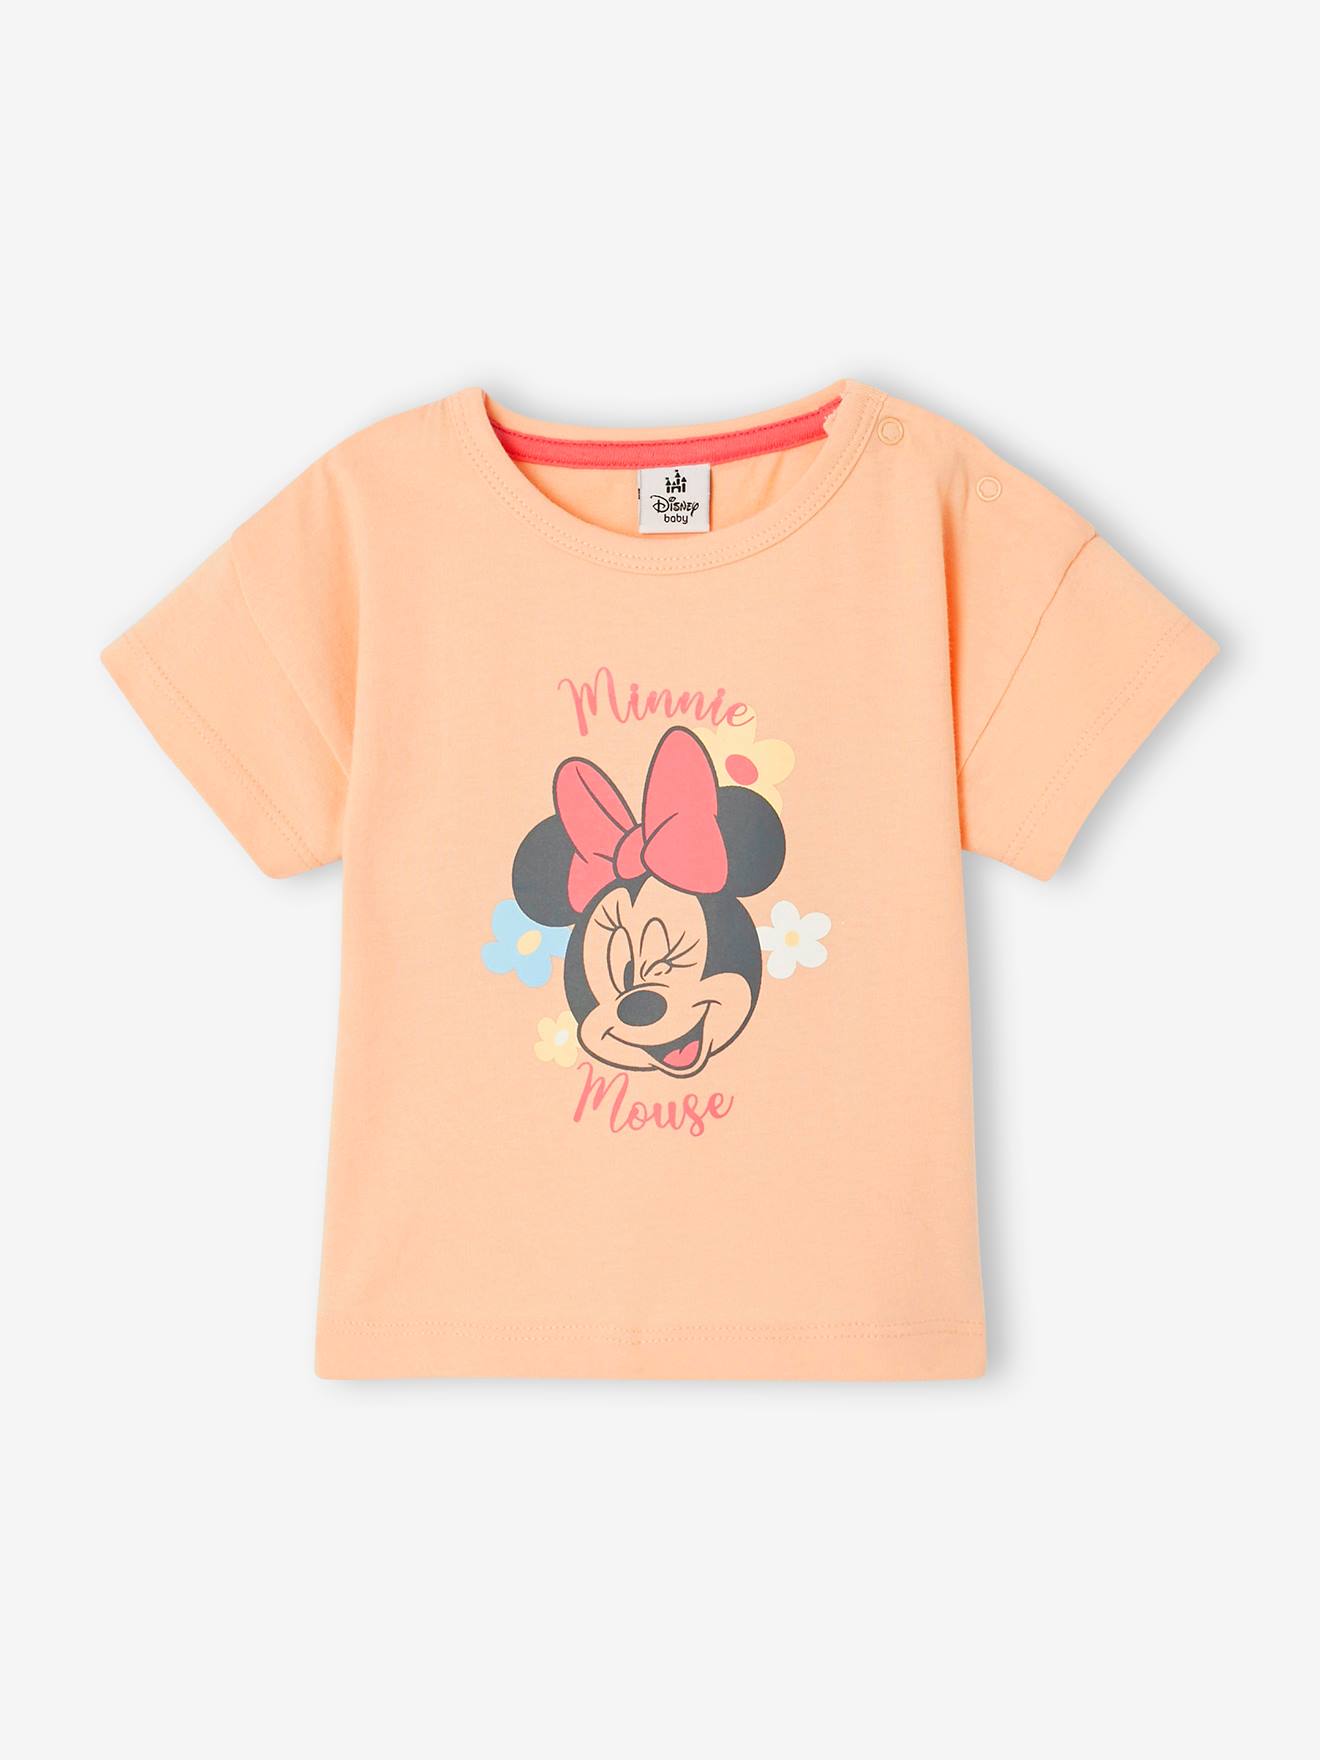 Minnie Mouse T-Shirt for Babies by Disney(r) peach